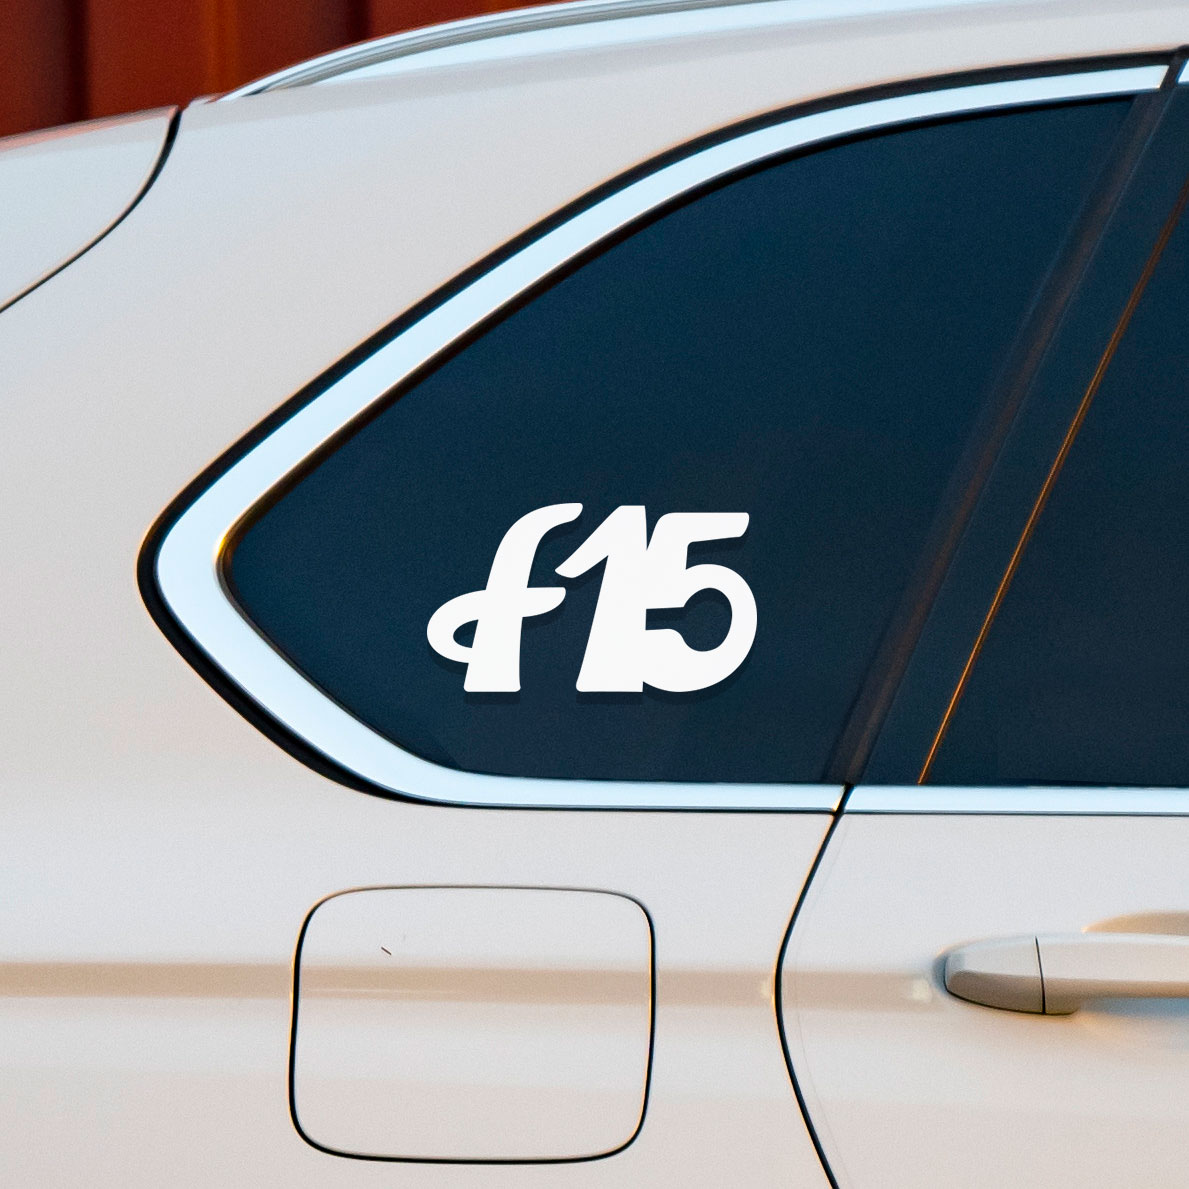 Sticker for BMW X5 f15 generation. Available in different colors. Contour cut from premium outdoor vinyls. Never fades out.